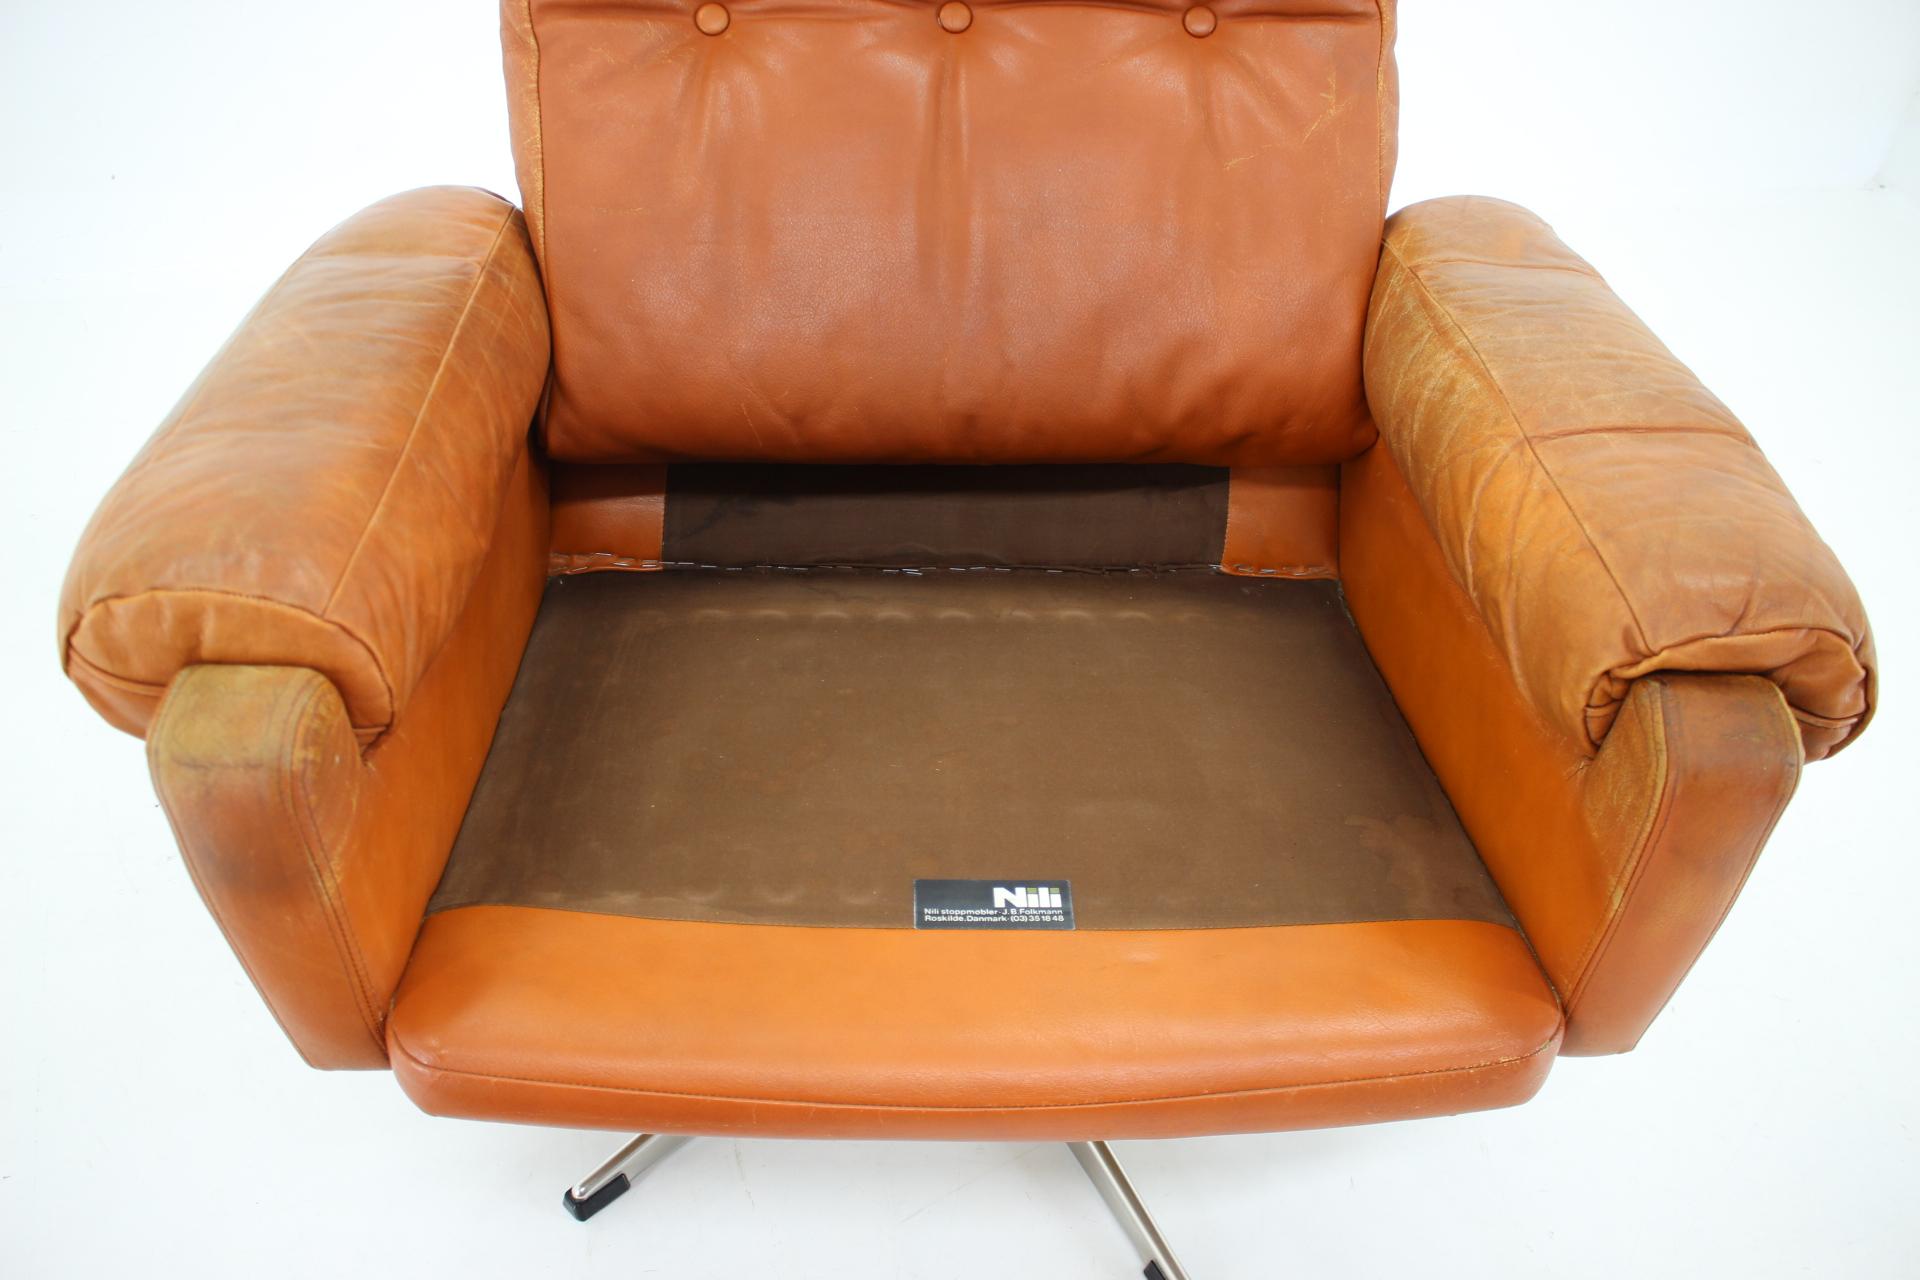 1970s Leather Swivel Armchair by Nili Stoppmobler, Denmark For Sale 8